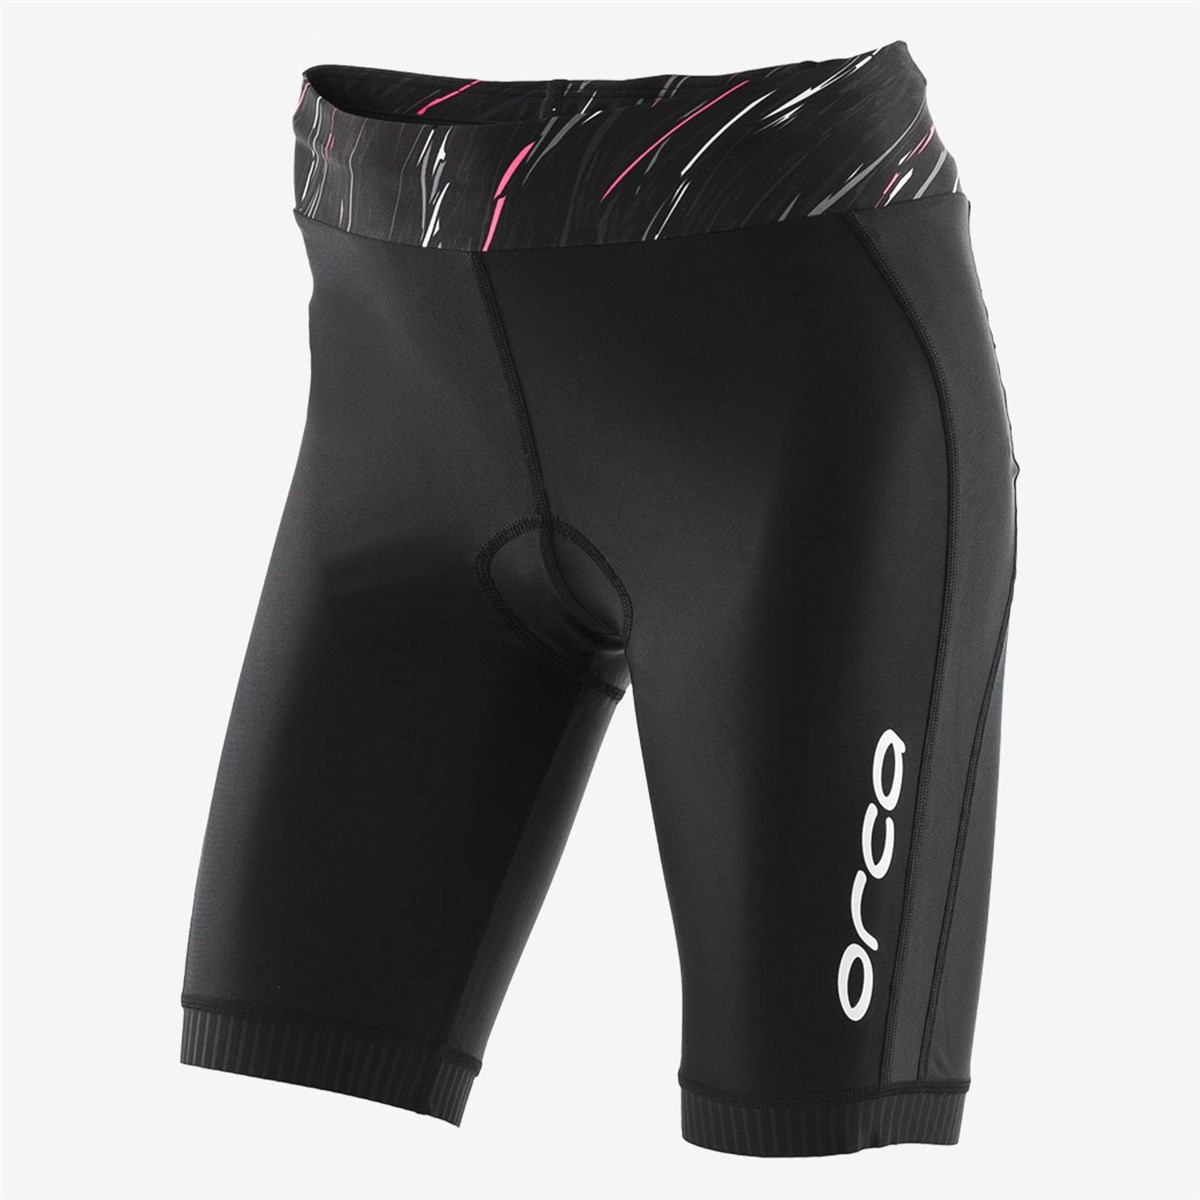 Orca Core Womens Tri Shorts product image